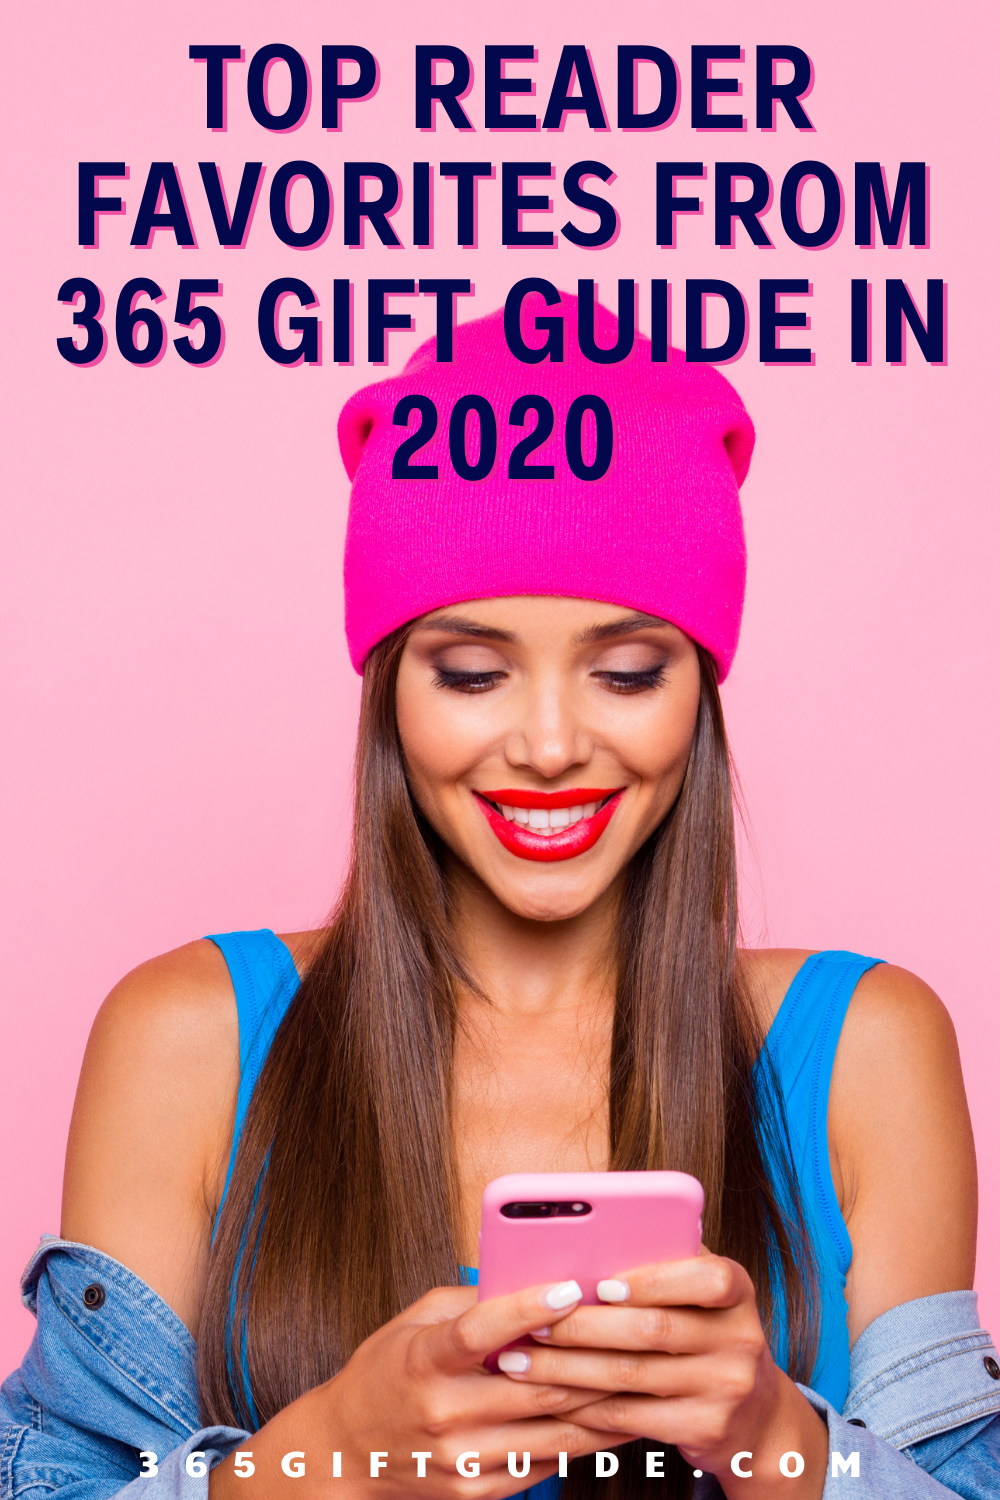 top 25 reader favorites from 365 Gift Guide in 2020